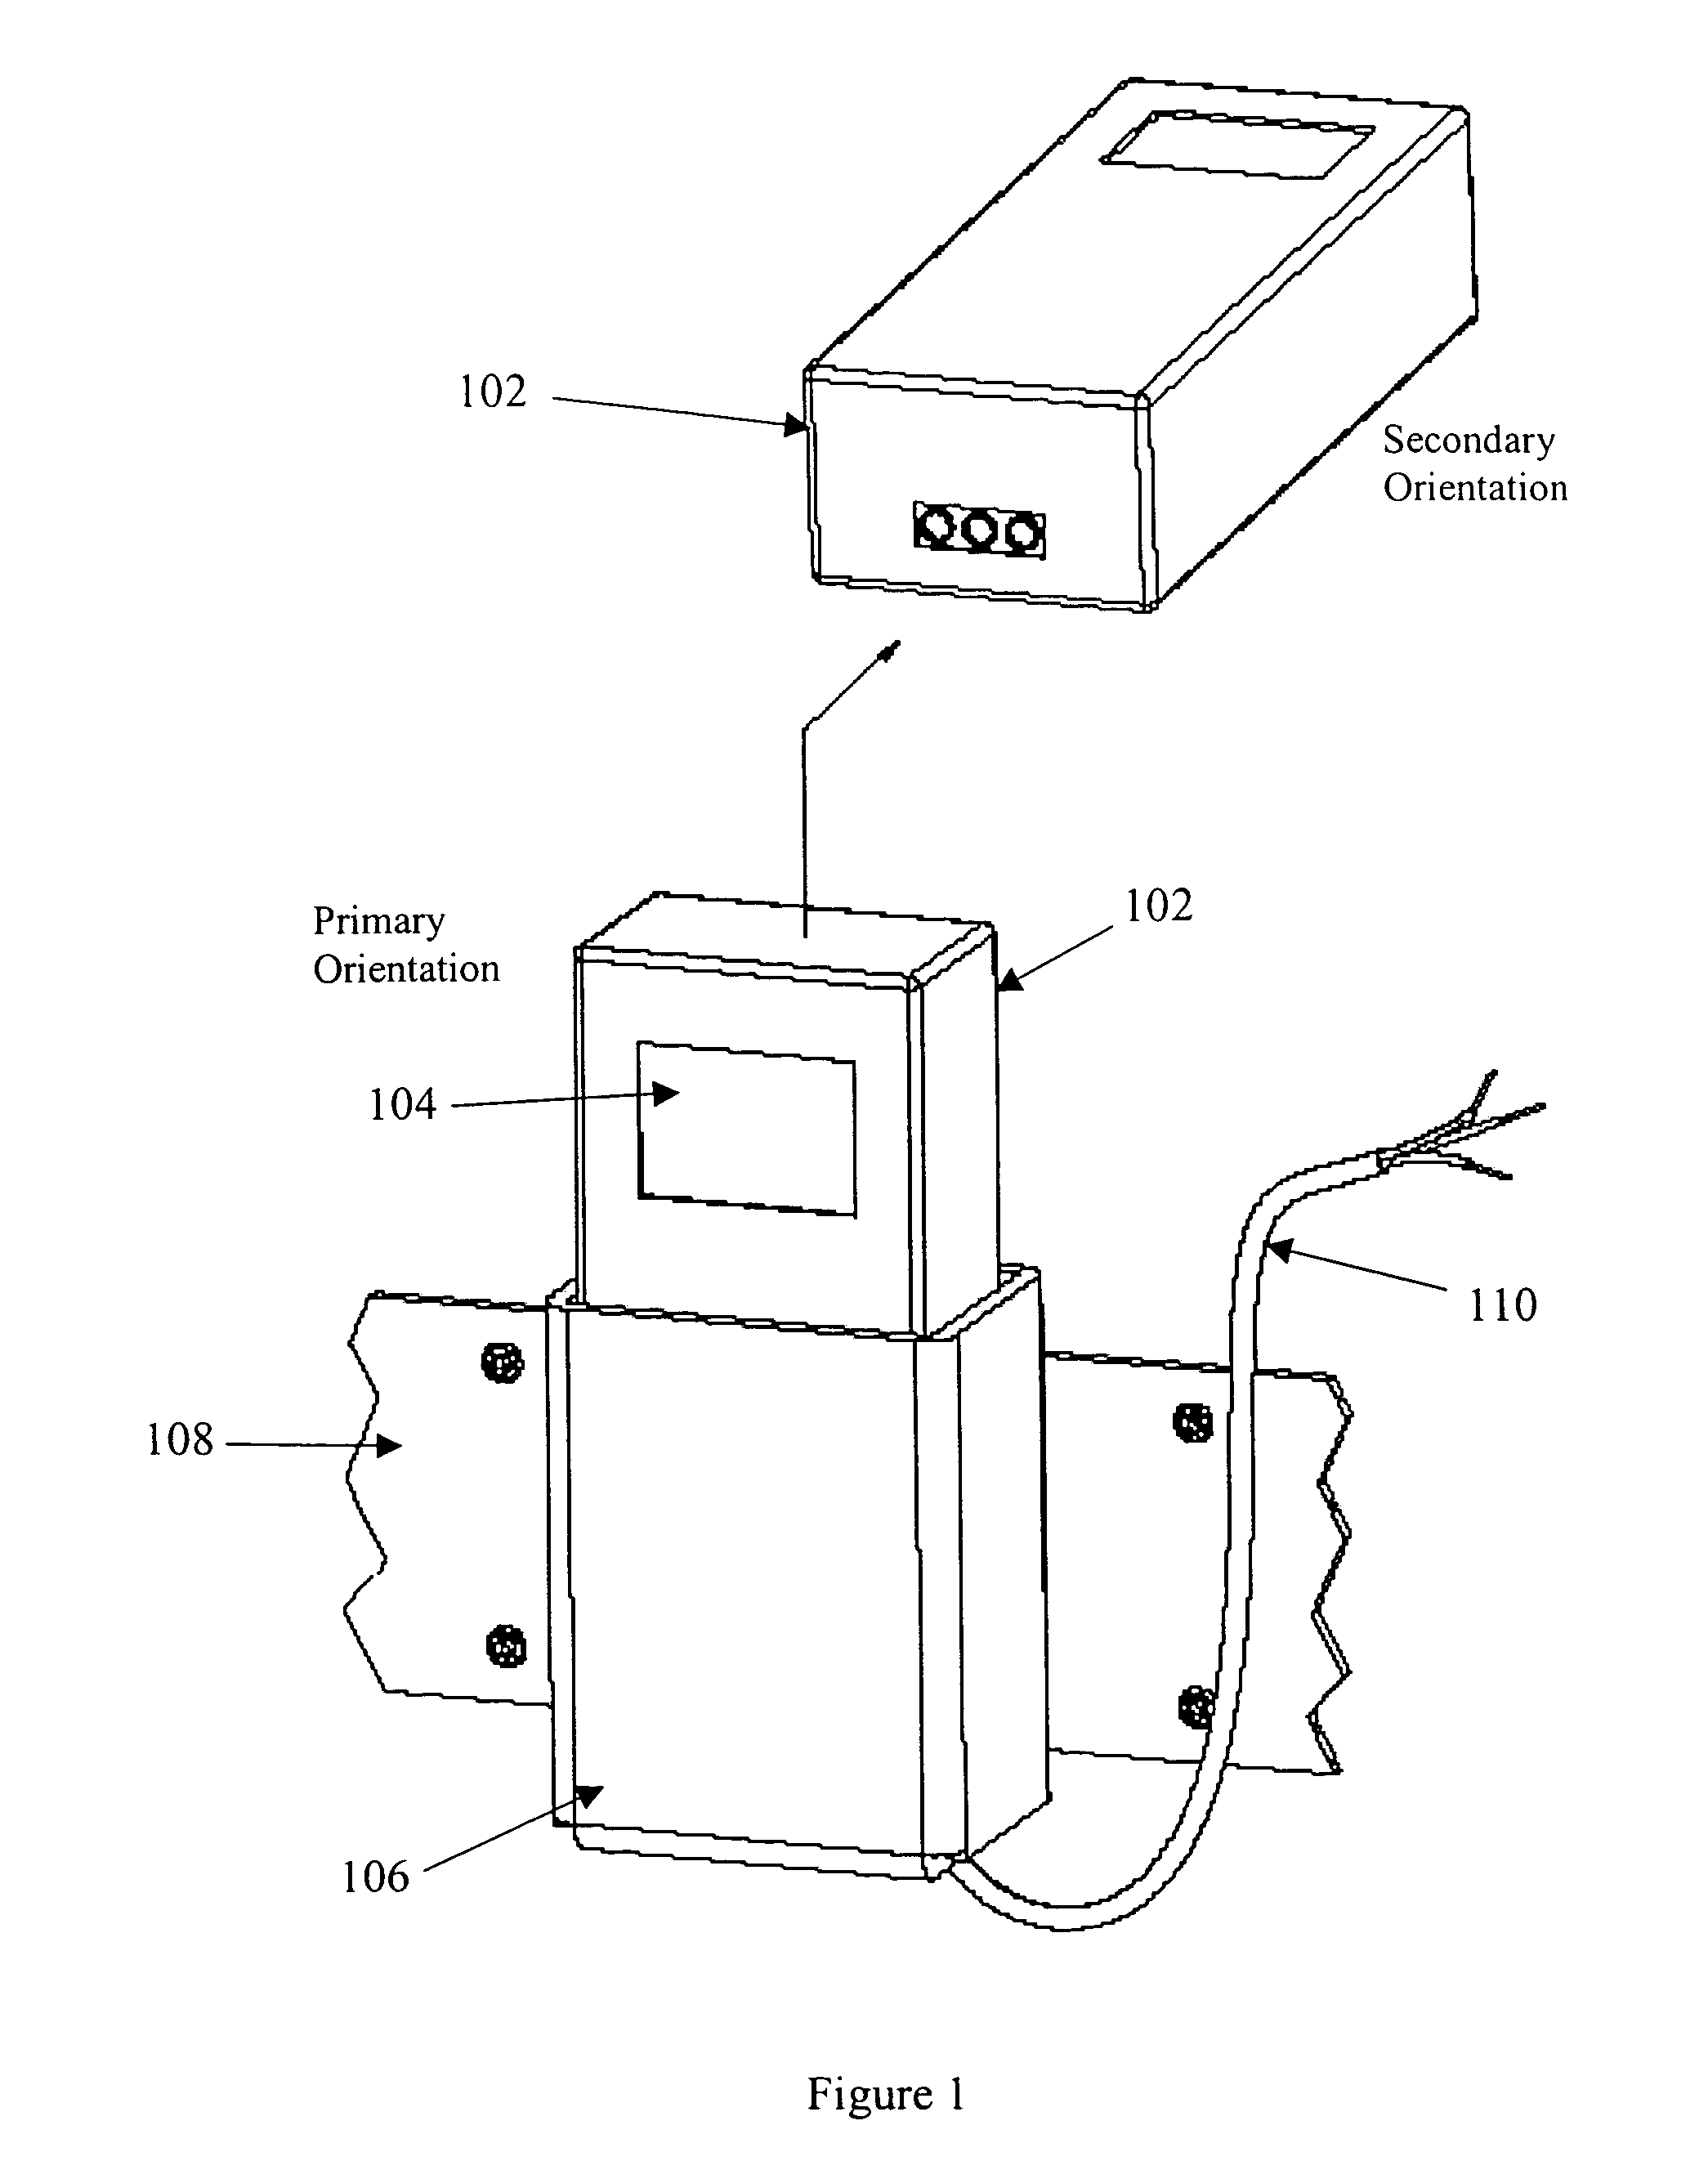 Multi-mode navigation device and method